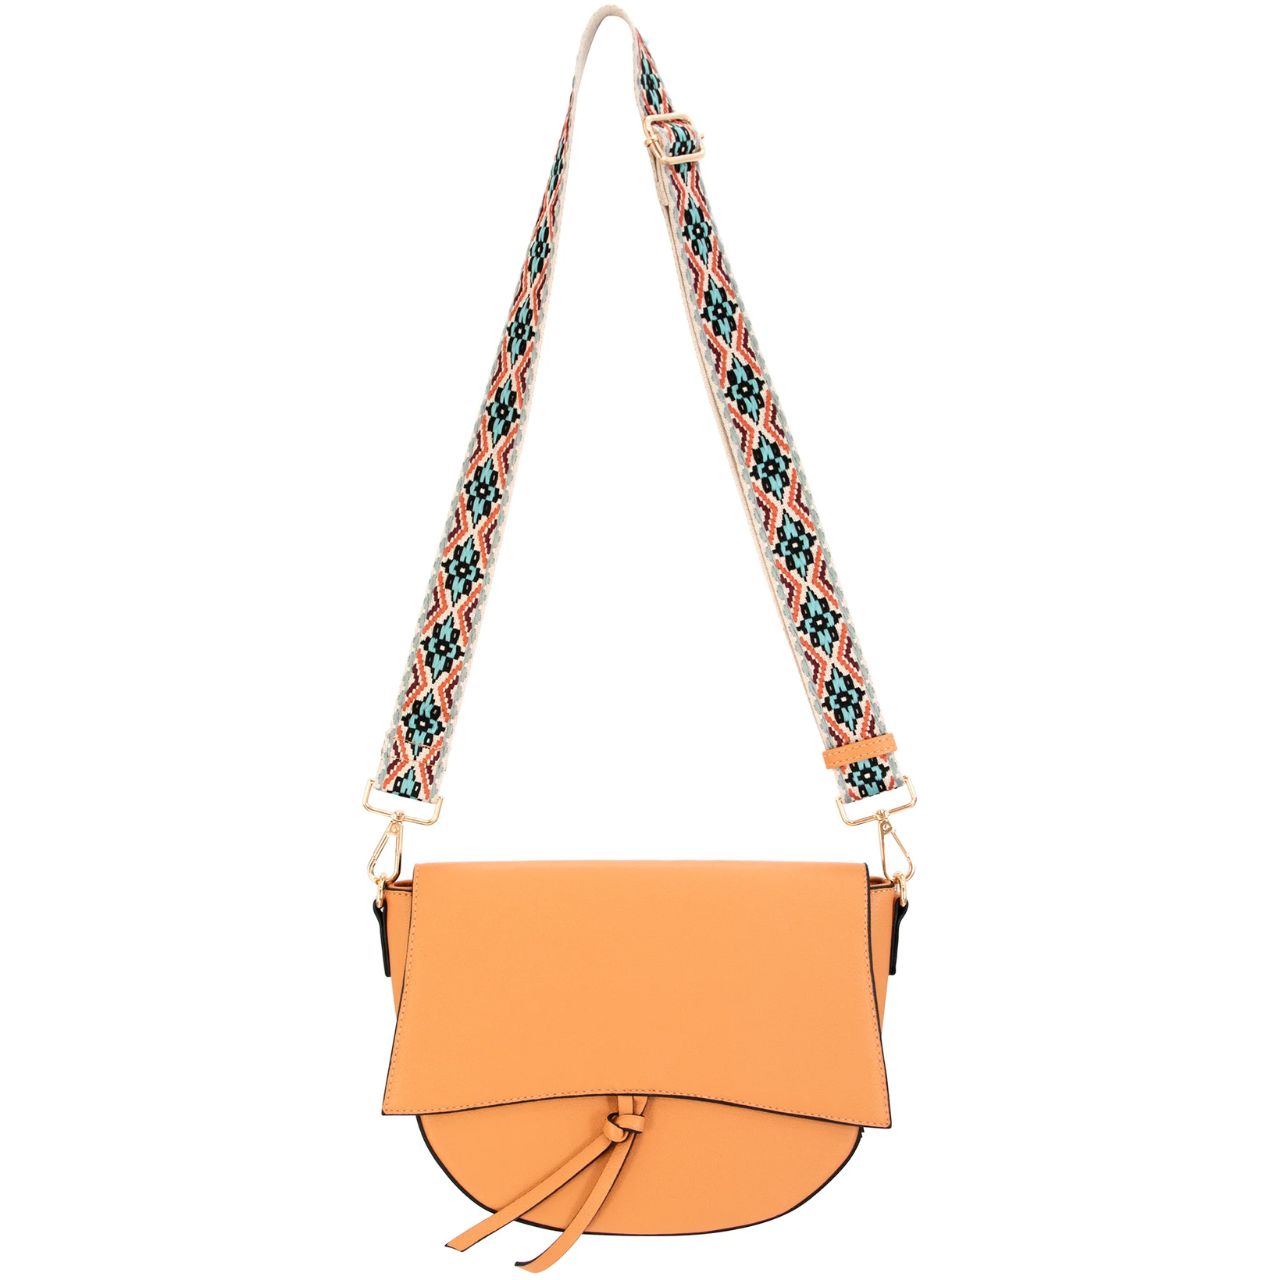 Apricot Colored Concealed Carry Purse with Embroidered Shoulder Strap